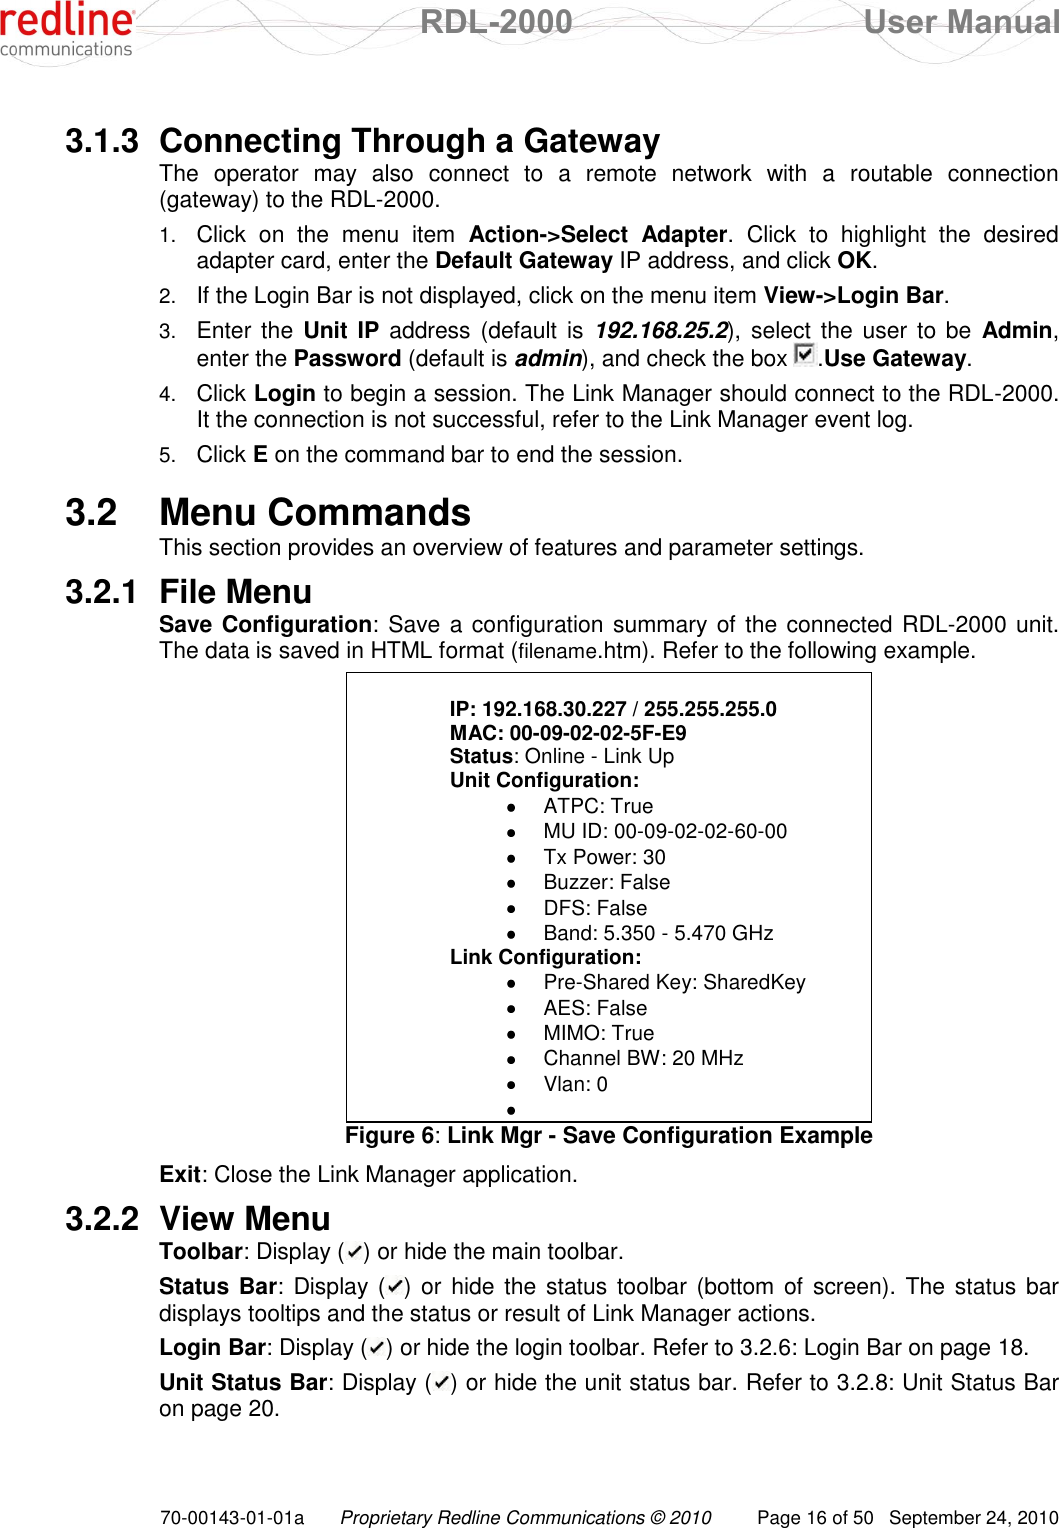  RDL-2000  User Manual 70-00143-01-01a Proprietary Redline Communications © 2010  Page 16 of 50  September 24, 2010  3.1.3  Connecting Through a Gateway The  operator  may  also  connect  to  a  remote  network  with  a  routable  connection (gateway) to the RDL-2000. 1. Click  on  the  menu  item  Action-&gt;Select  Adapter.  Click  to  highlight  the  desired adapter card, enter the Default Gateway IP address, and click OK. 2. If the Login Bar is not displayed, click on the menu item View-&gt;Login Bar. 3. Enter the Unit IP address  (default is 192.168.25.2), select the  user to be  Admin, enter the Password (default is admin), and check the box  .Use Gateway. 4. Click Login to begin a session. The Link Manager should connect to the RDL-2000. It the connection is not successful, refer to the Link Manager event log. 5. Click E on the command bar to end the session.  3.2  Menu Commands This section provides an overview of features and parameter settings. 3.2.1  File Menu Save Configuration: Save a configuration summary of the connected RDL-2000 unit. The data is saved in HTML format (filename.htm). Refer to the following example.  IP: 192.168.30.227 / 255.255.255.0 MAC: 00-09-02-02-5F-E9 Status: Online - Link Up Unit Configuration:    ATPC: True    MU ID: 00-09-02-02-60-00    Tx Power: 30    Buzzer: False    DFS: False    Band: 5.350 - 5.470 GHz  Link Configuration:    Pre-Shared Key: SharedKey    AES: False    MIMO: True    Channel BW: 20 MHz    Vlan: 0     Figure 6: Link Mgr - Save Configuration Example Exit: Close the Link Manager application. 3.2.2  View Menu Toolbar: Display ( ) or hide the main toolbar. Status Bar: Display ( ) or hide  the status toolbar (bottom  of screen). The status bar displays tooltips and the status or result of Link Manager actions. Login Bar: Display ( ) or hide the login toolbar. Refer to 3.2.6: Login Bar on page 18. Unit Status Bar: Display ( ) or hide the unit status bar. Refer to 3.2.8: Unit Status Bar on page 20.  